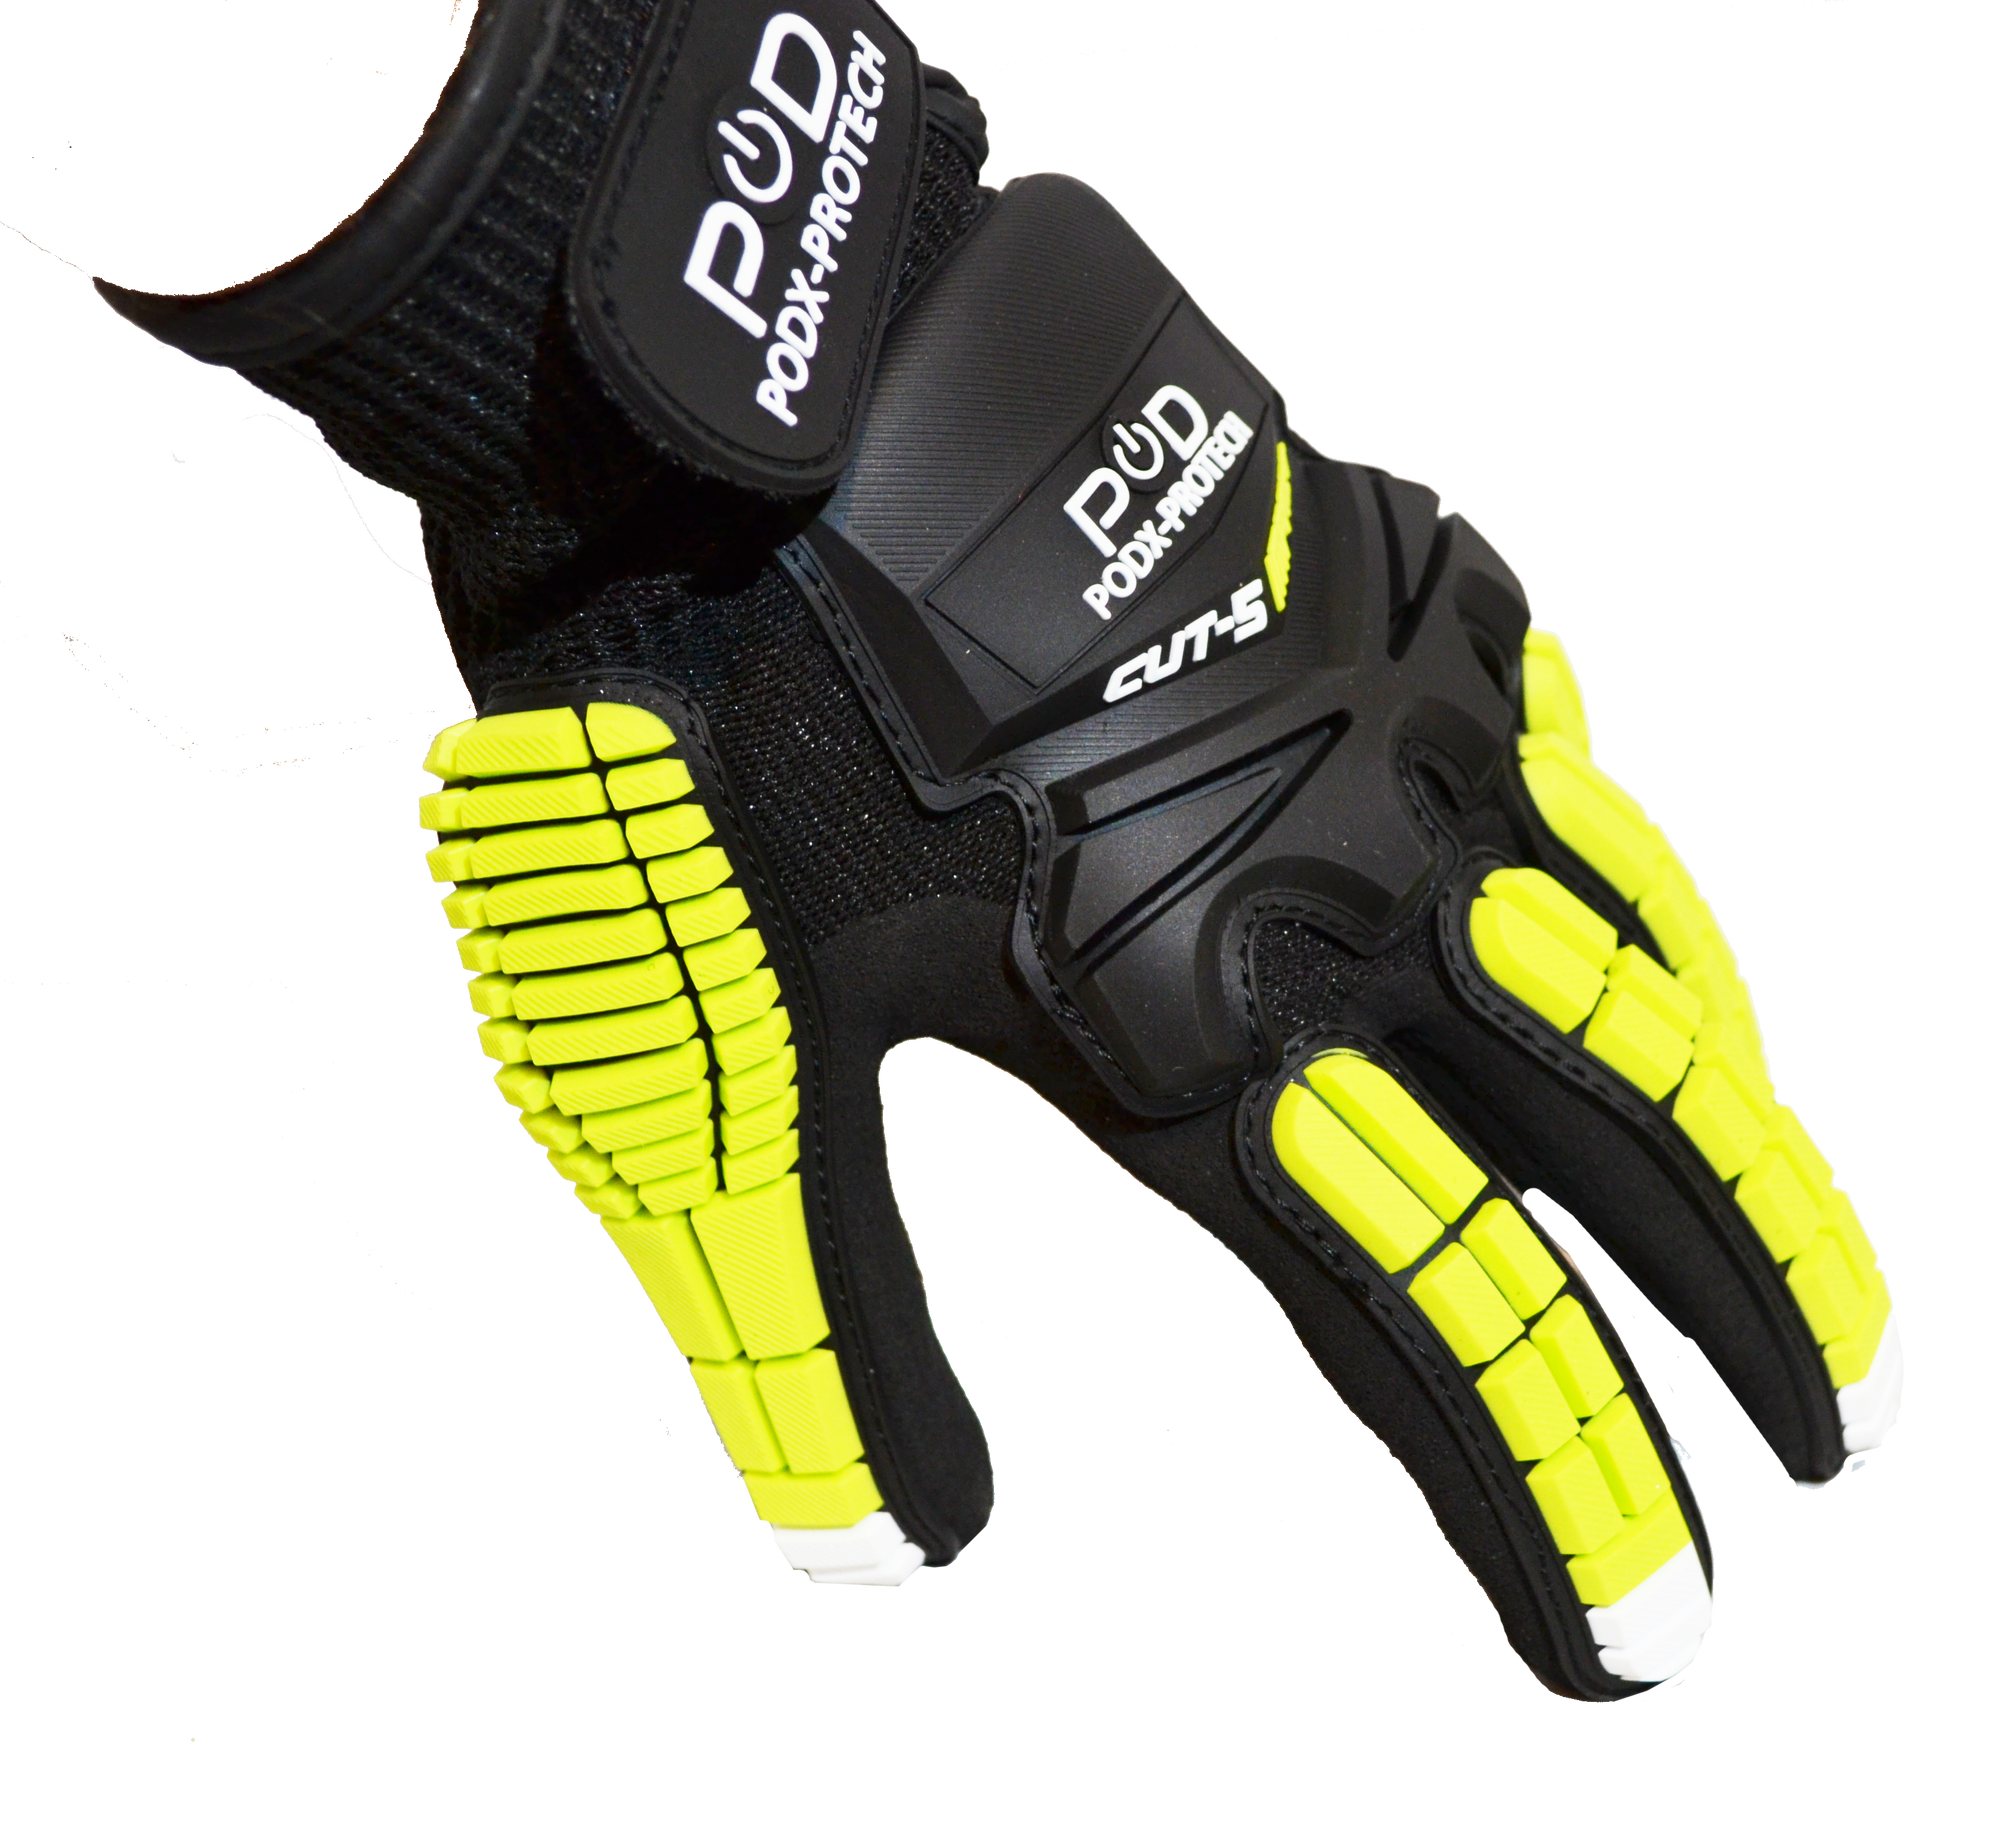 POD Protech Work Gloves | S,M,L,XL,XXL for Construction, Oil Mining, Drilling, Assembly, Farming, Landscaping, Masonry